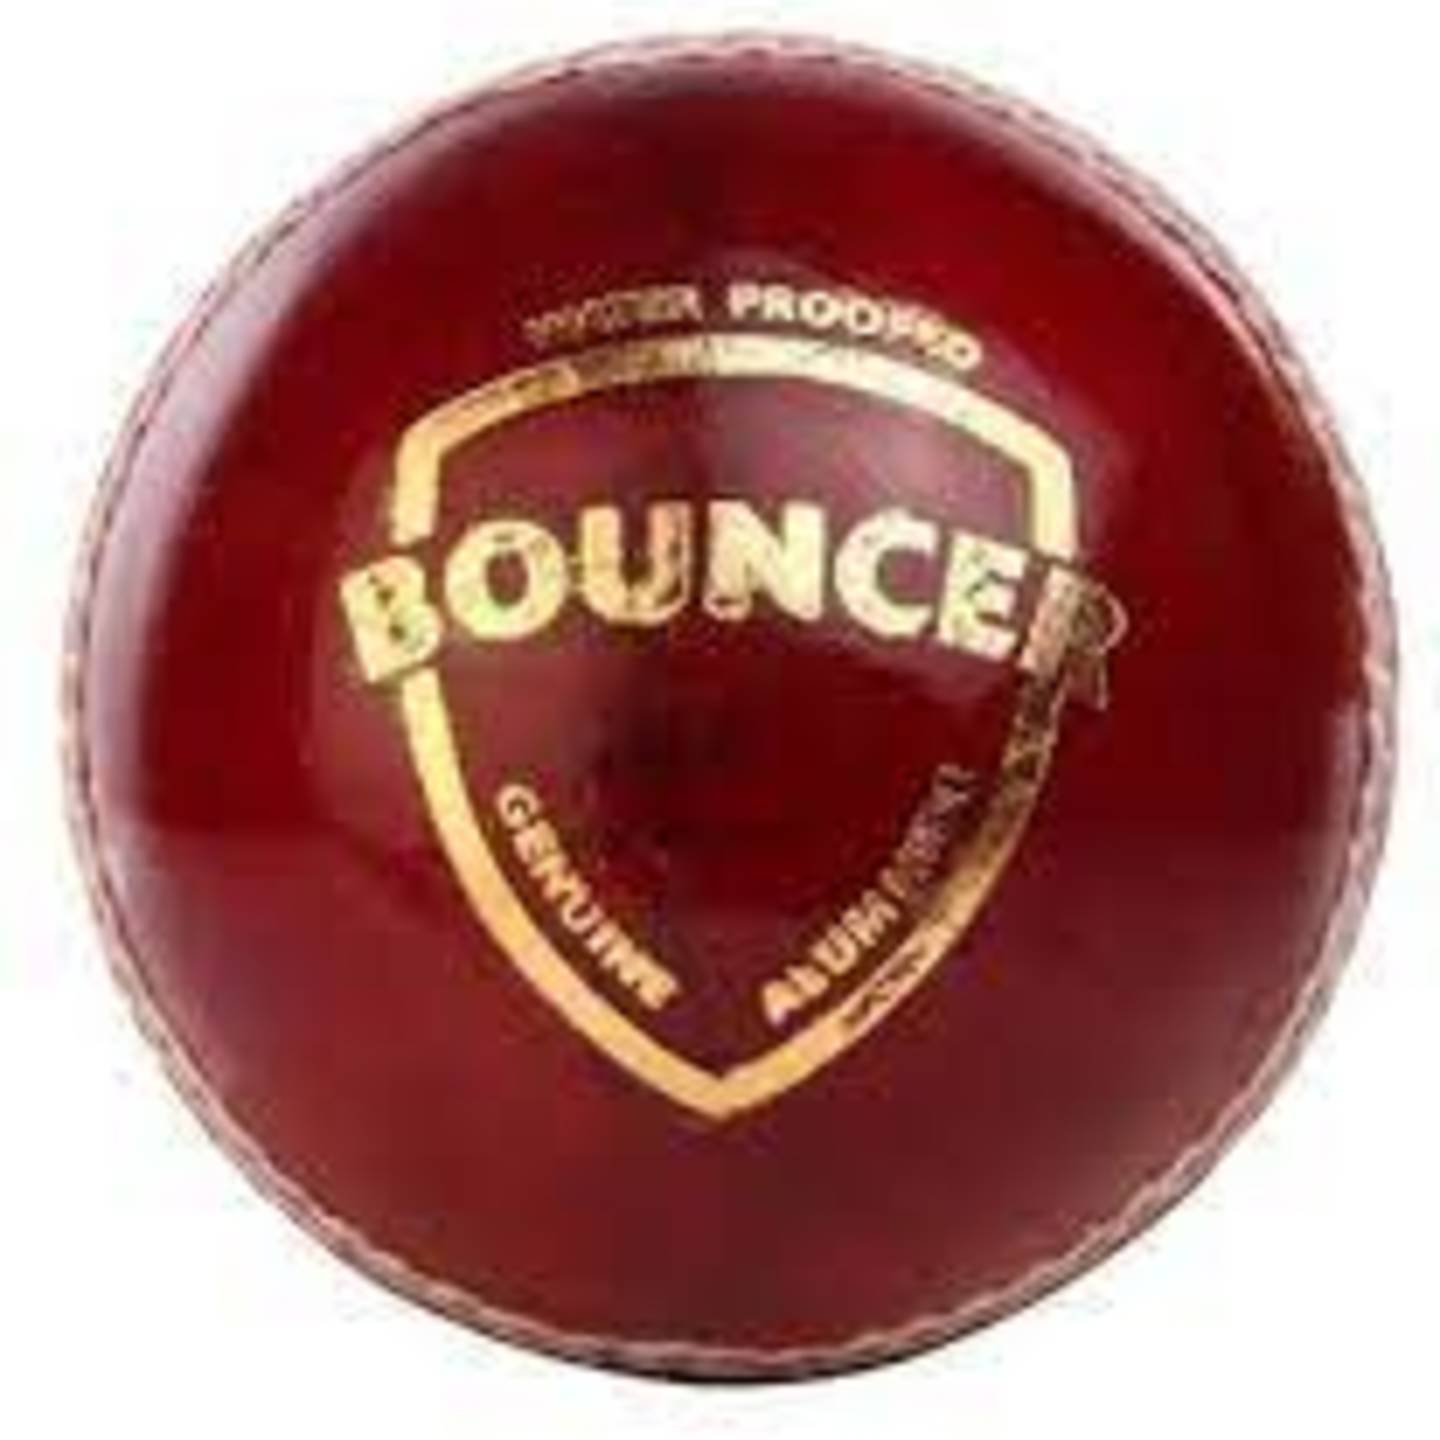  SG BOUNCER 4 PC. LEATHER CRICKET BALL